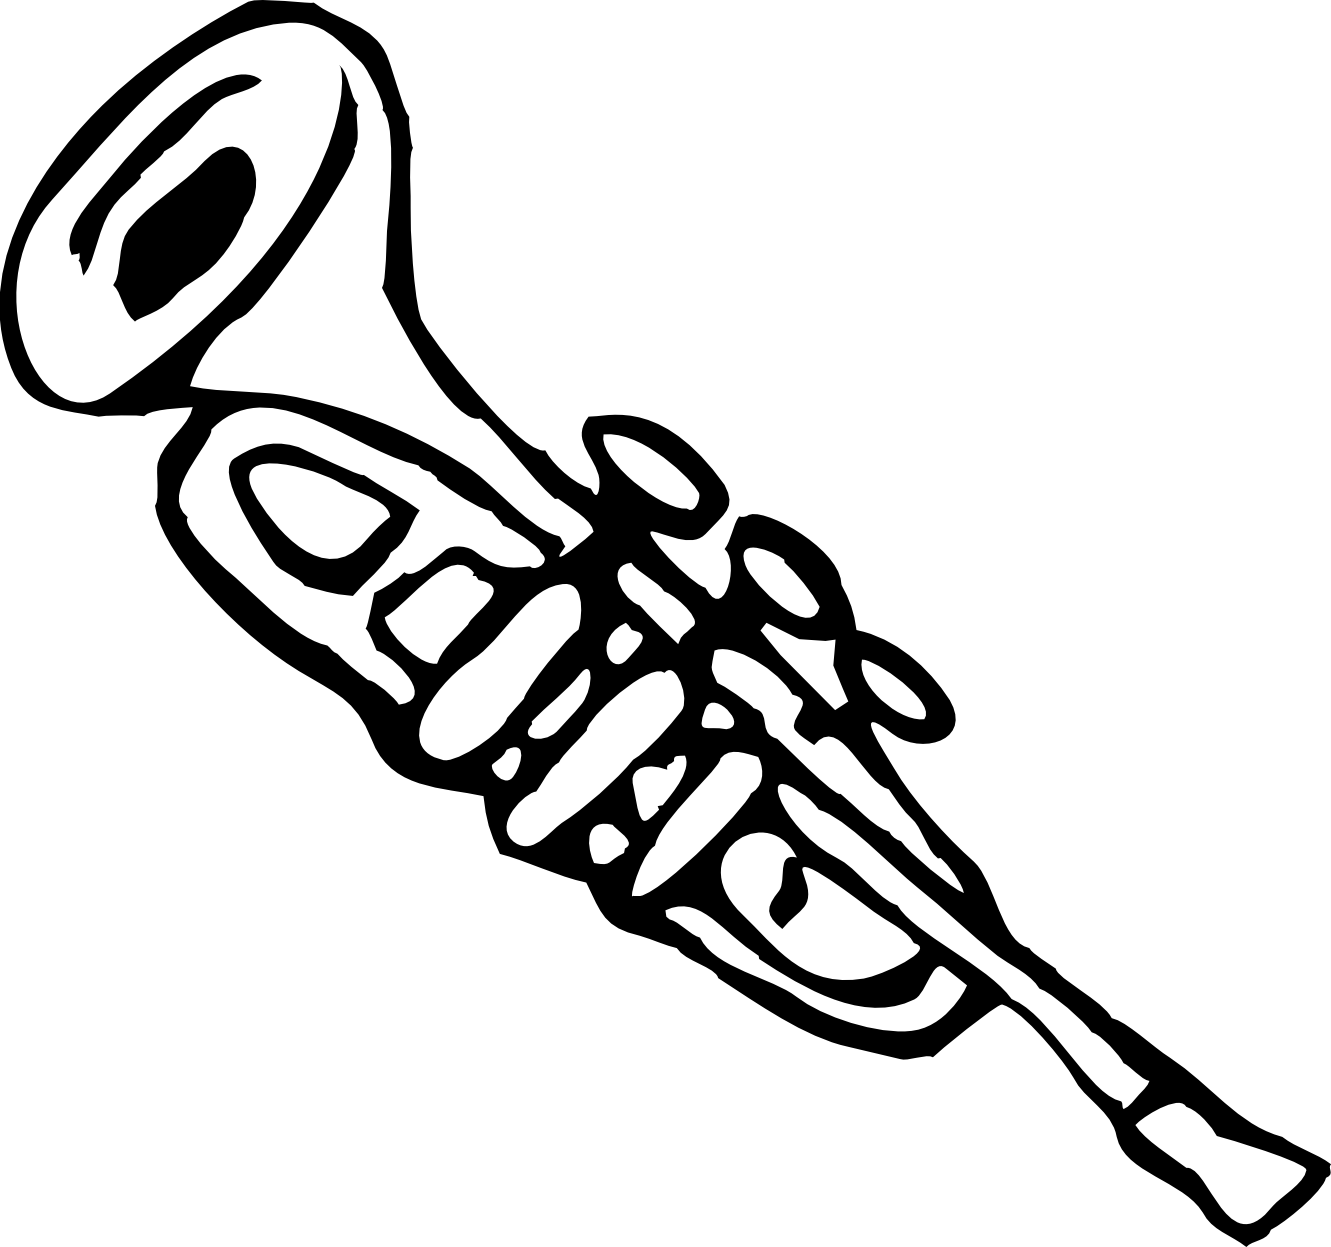 Piano black and white. Flutes clipart coloring page